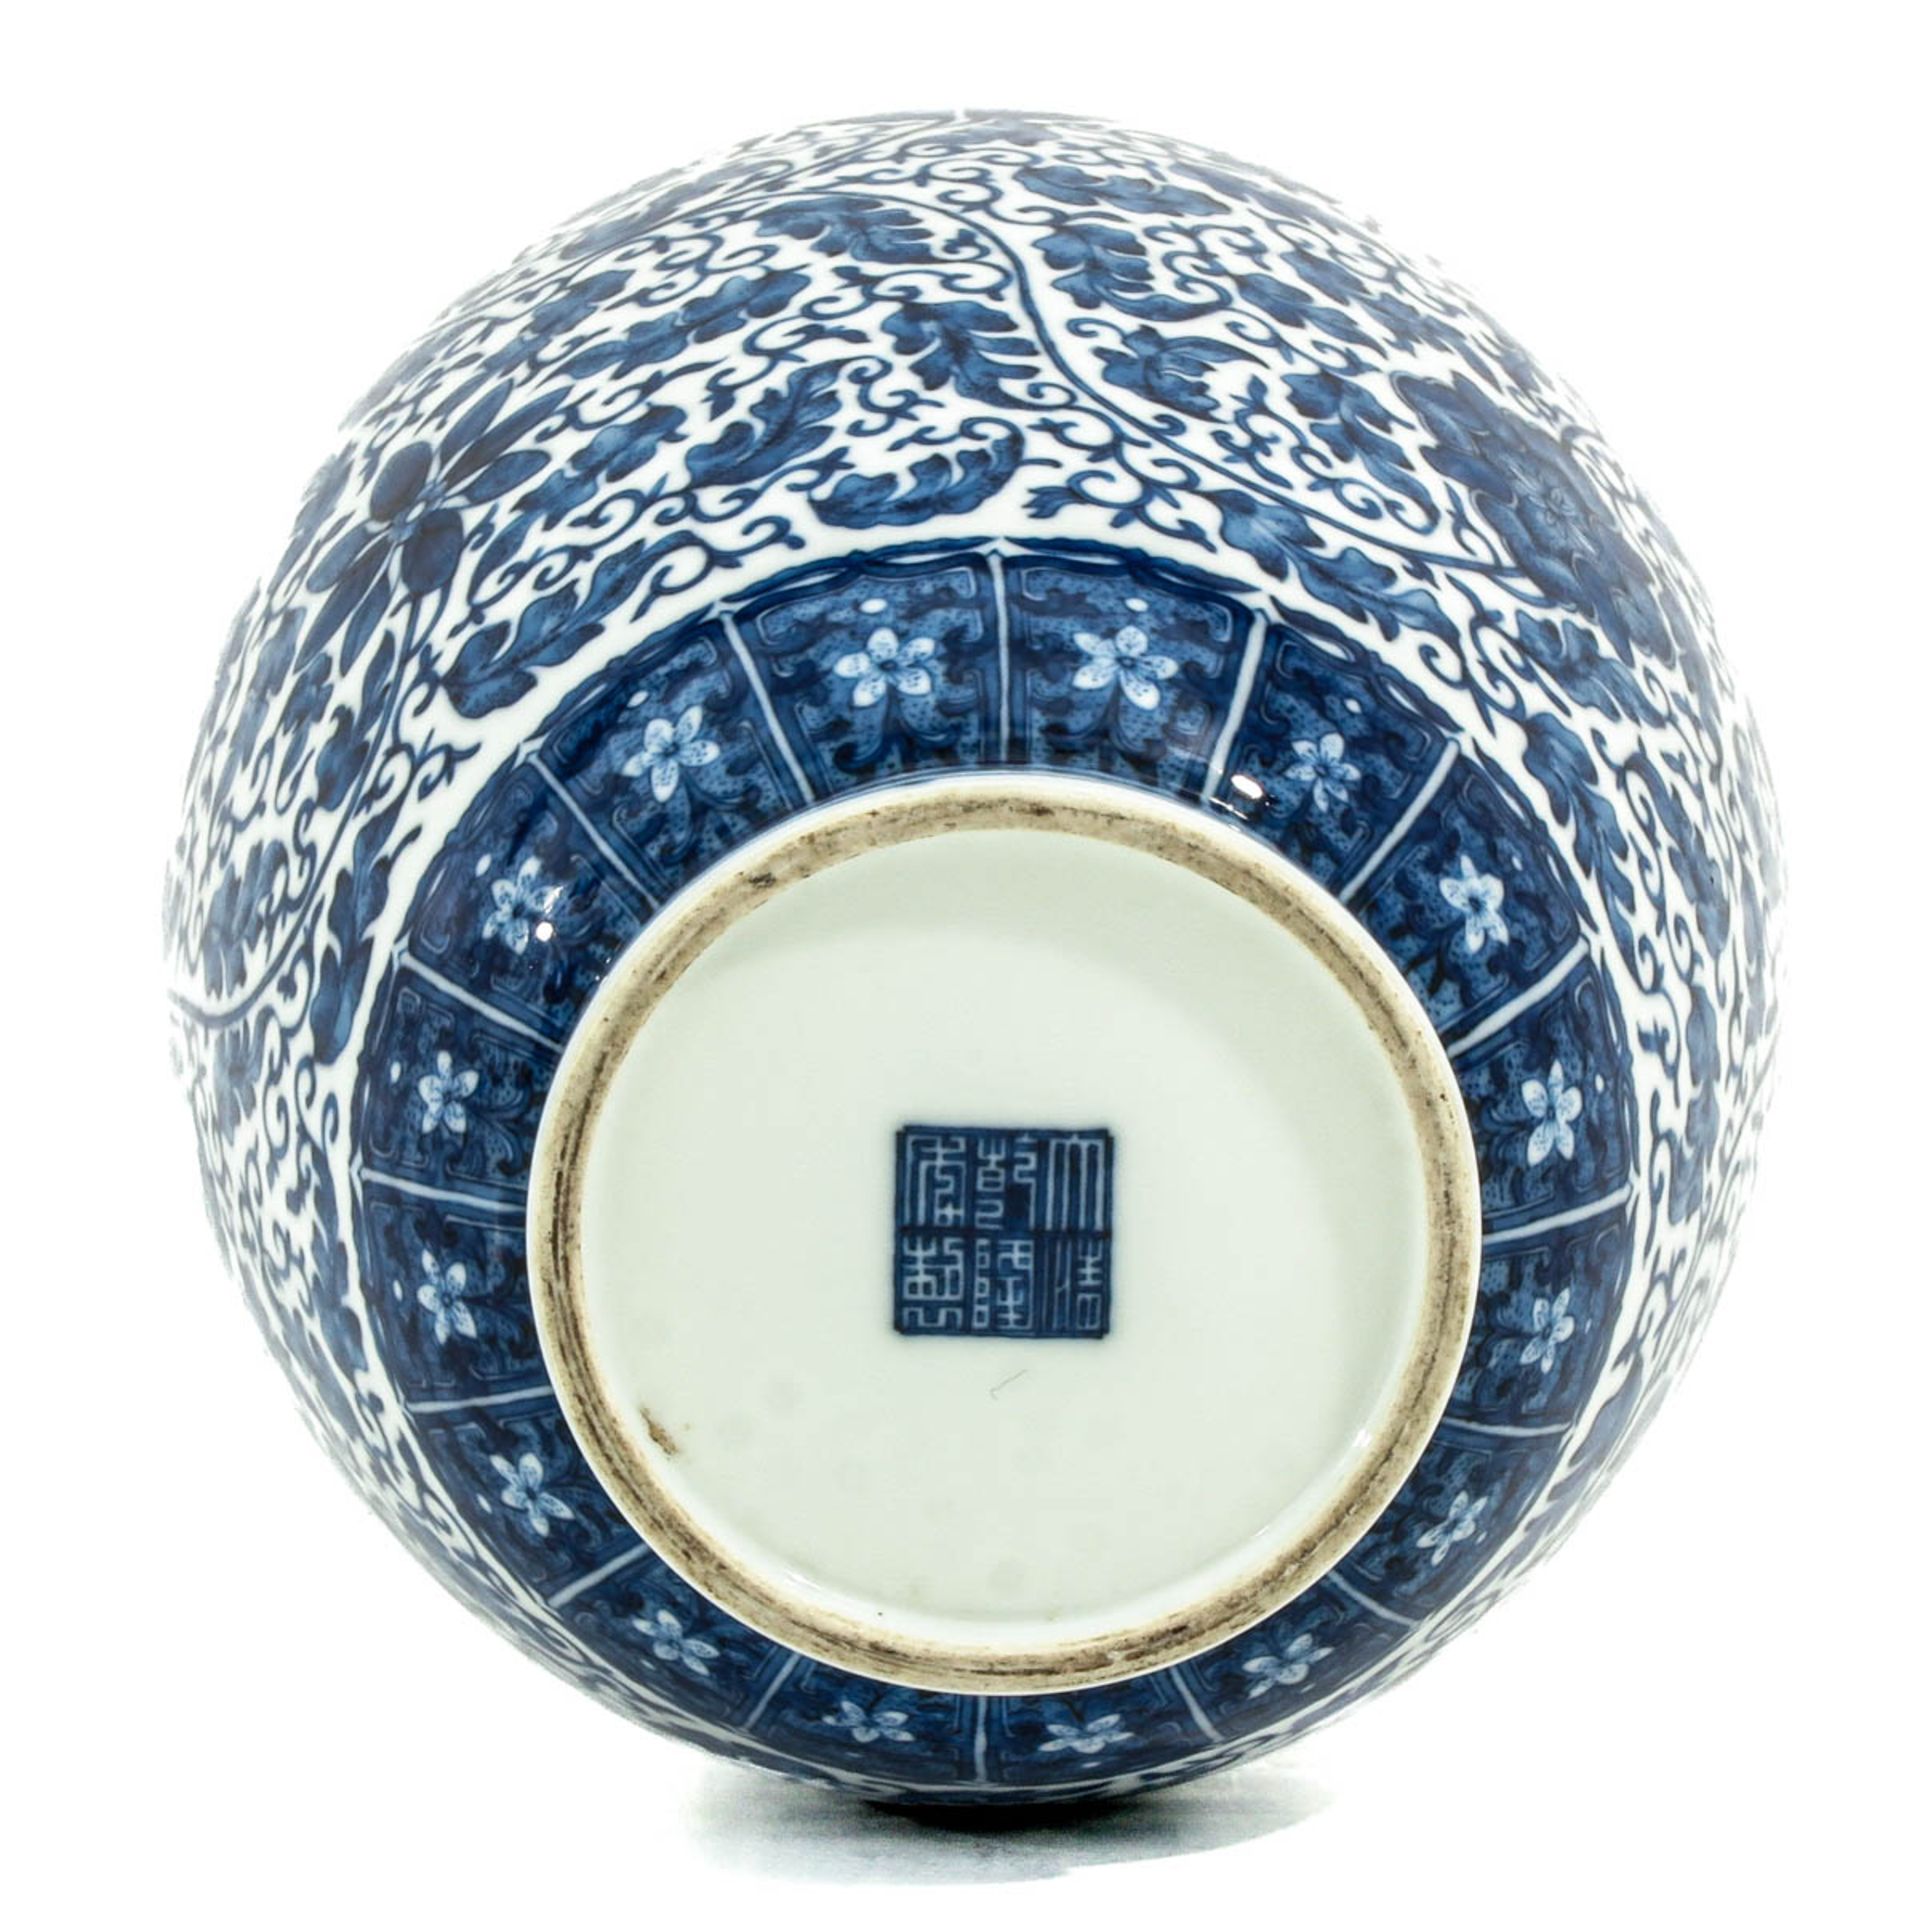 A Blue and White Vase - Image 6 of 10